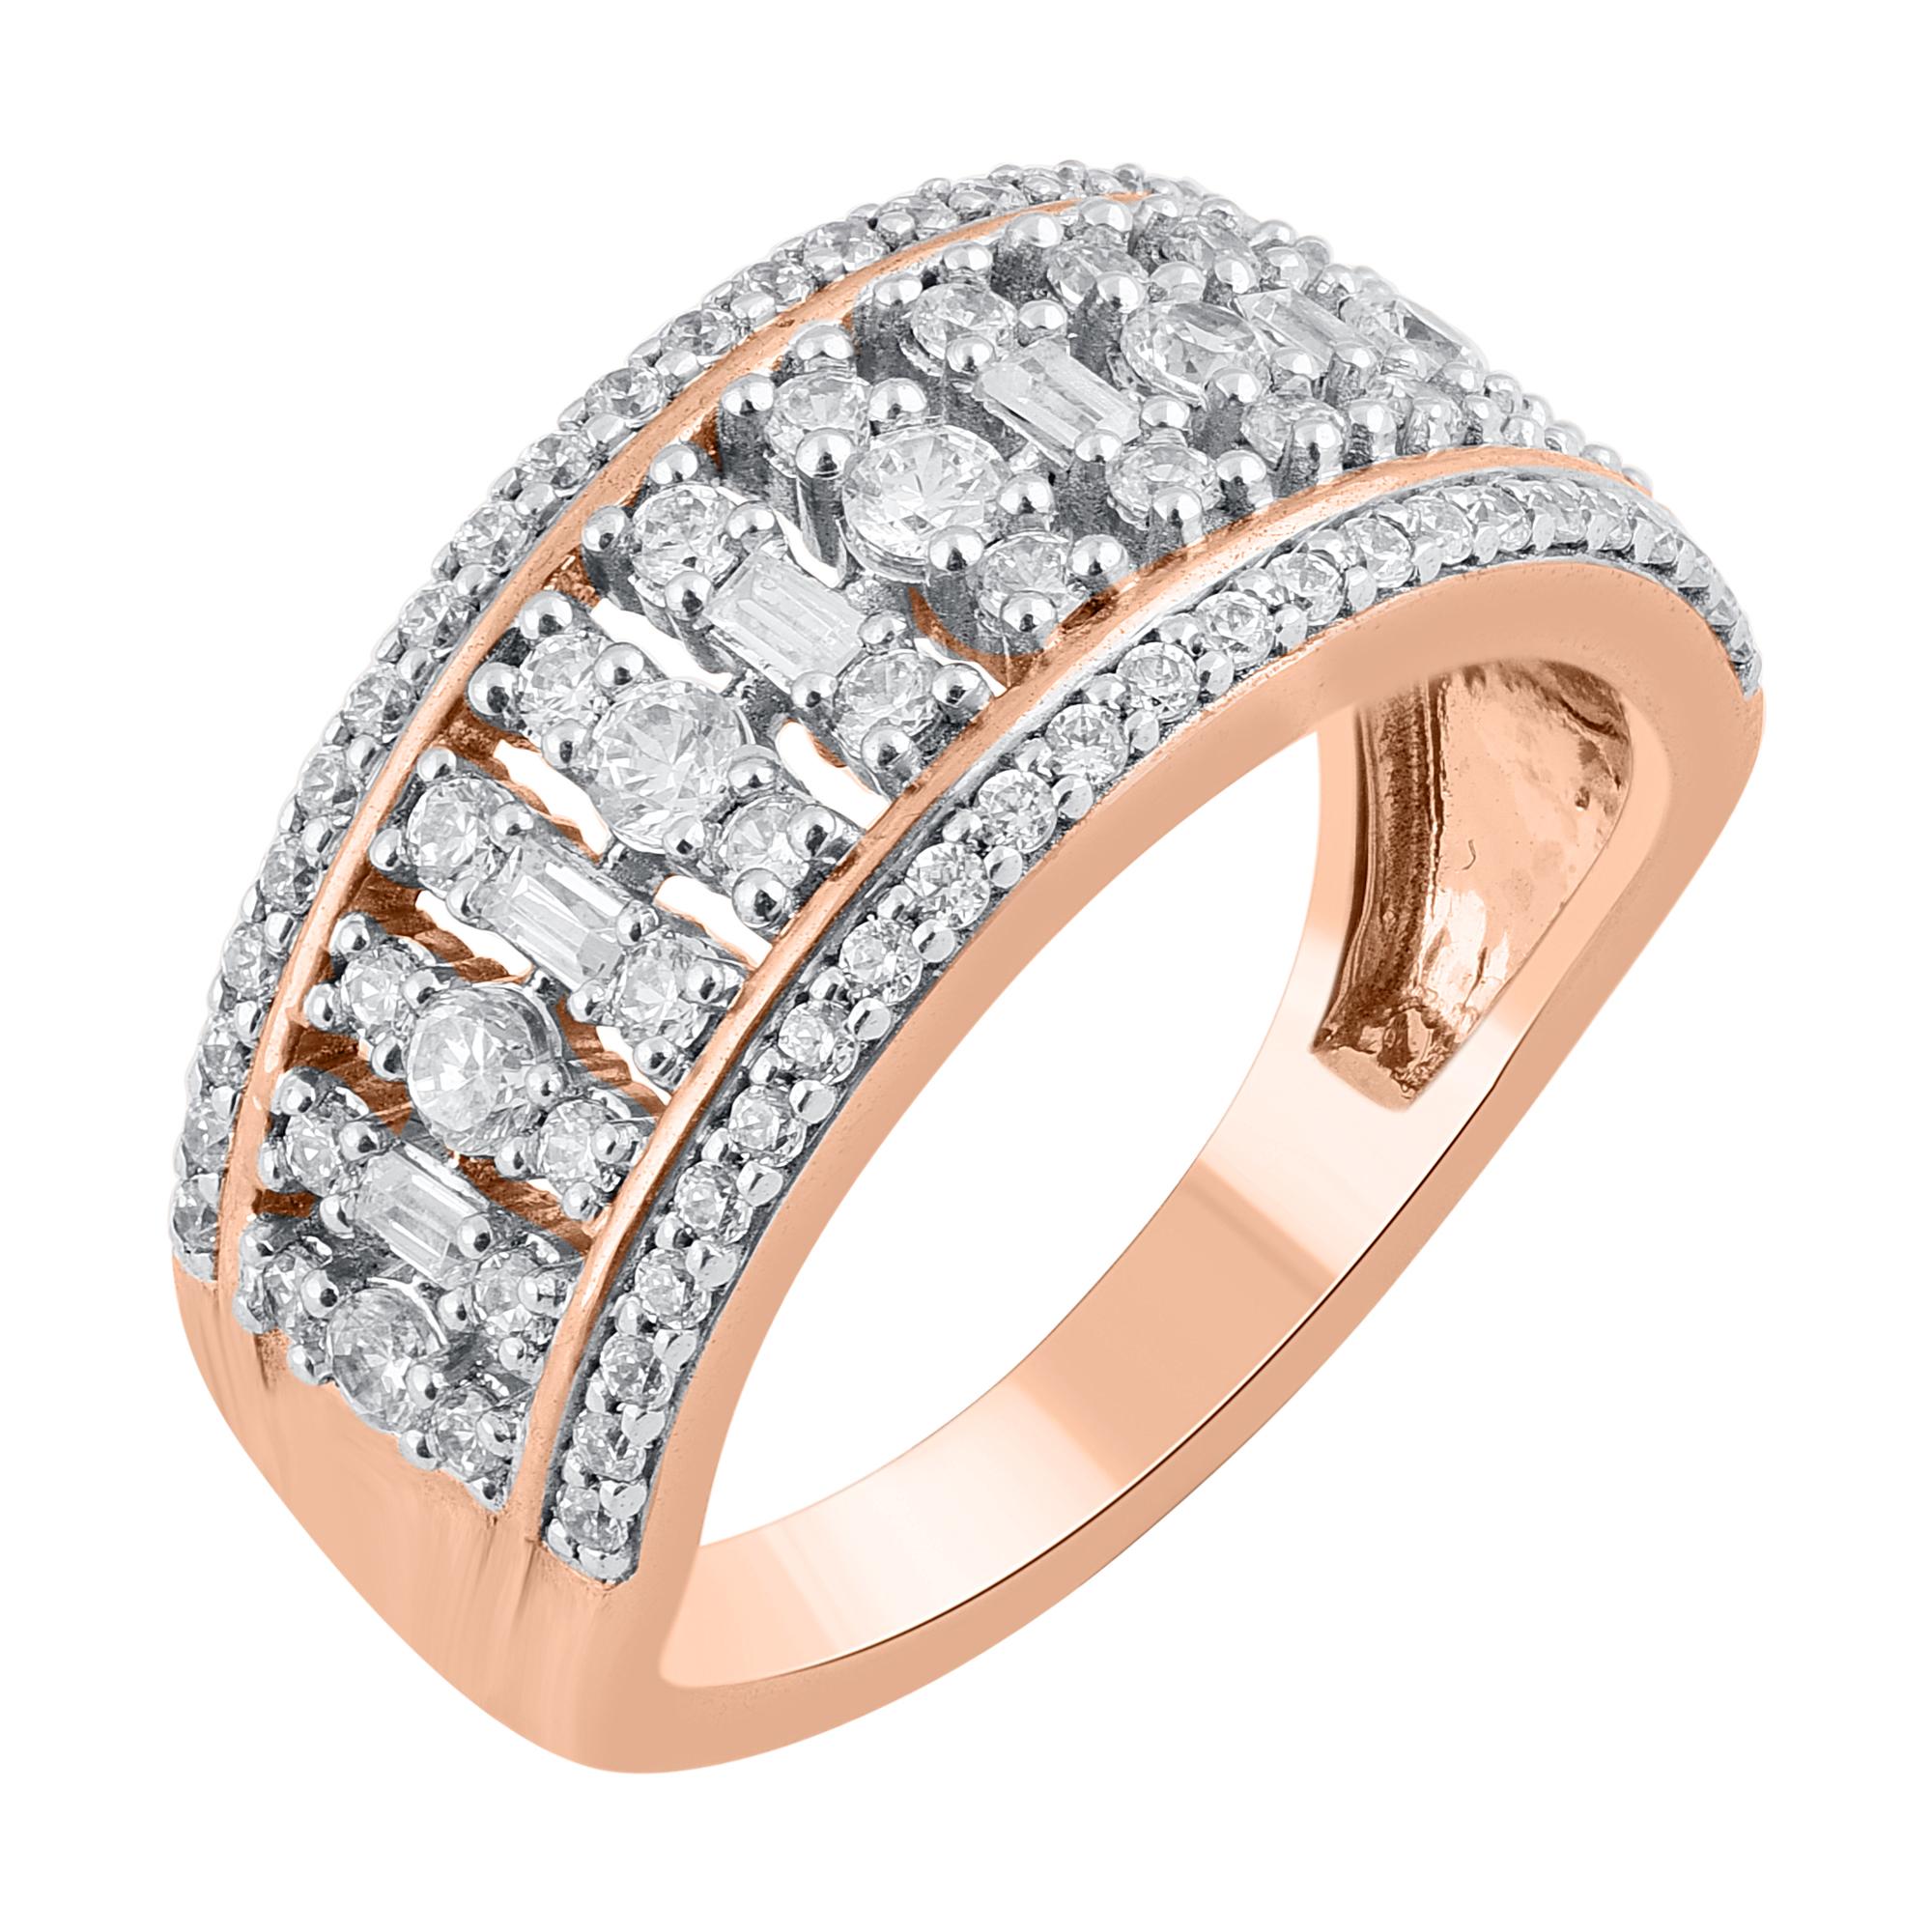 Make this year one to remember with the rows of sparkle in this round and baguette diamond wedding band. These band ring are studded with 85 natural diamonds in 18KT rose gold in prong setting. The white diamonds are graded as H-I color and I-2